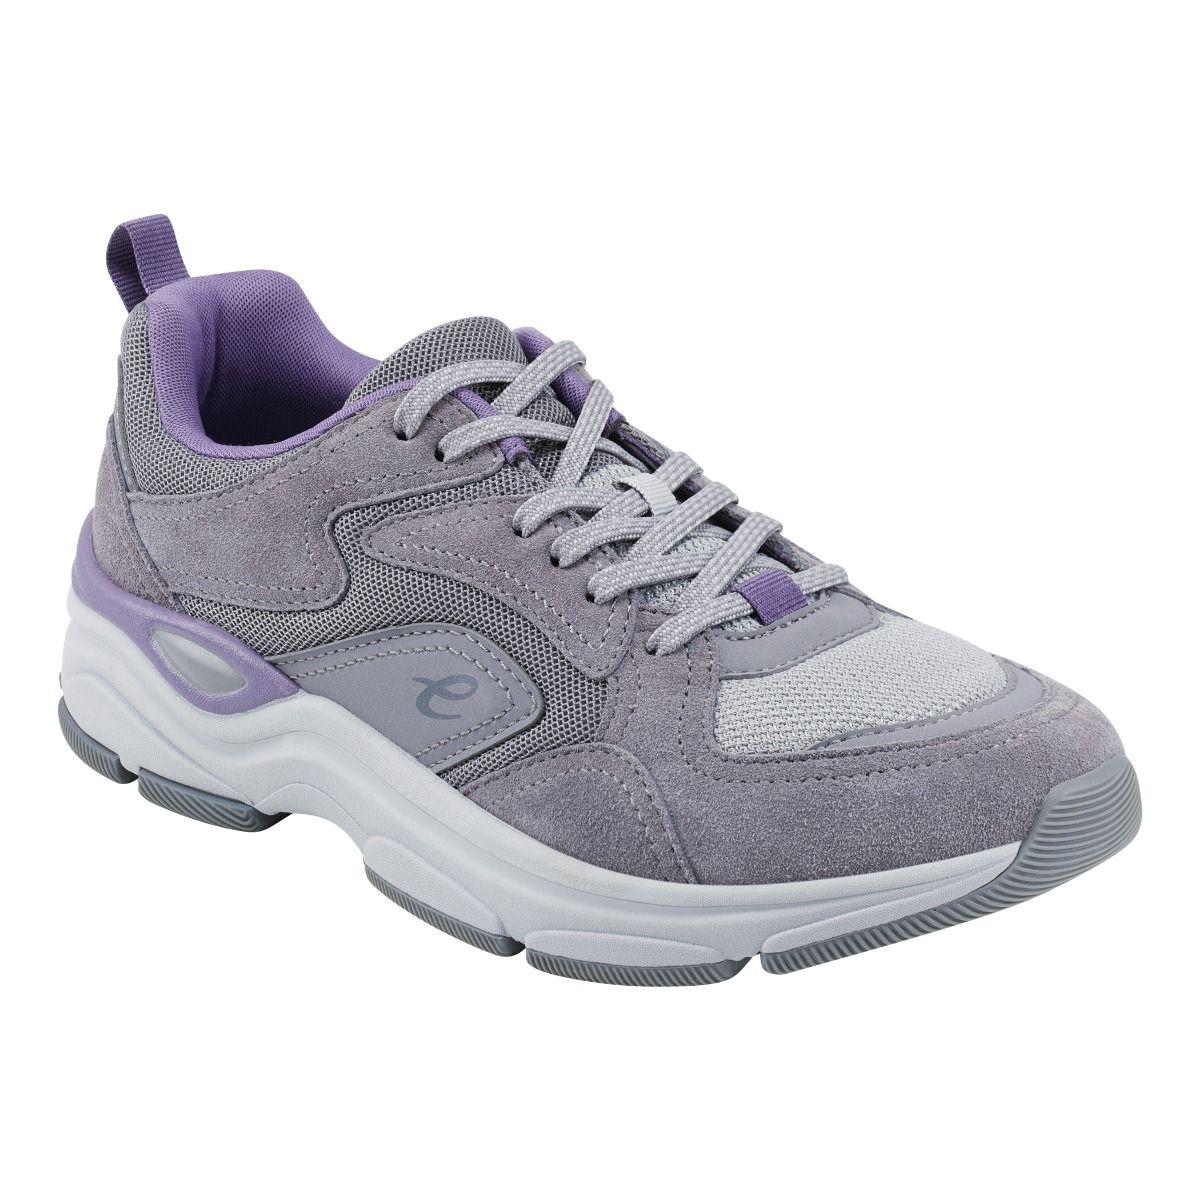 Easy Spirit Leather Squat Walking Shoes in Grey/Purple (Gray) - Lyst